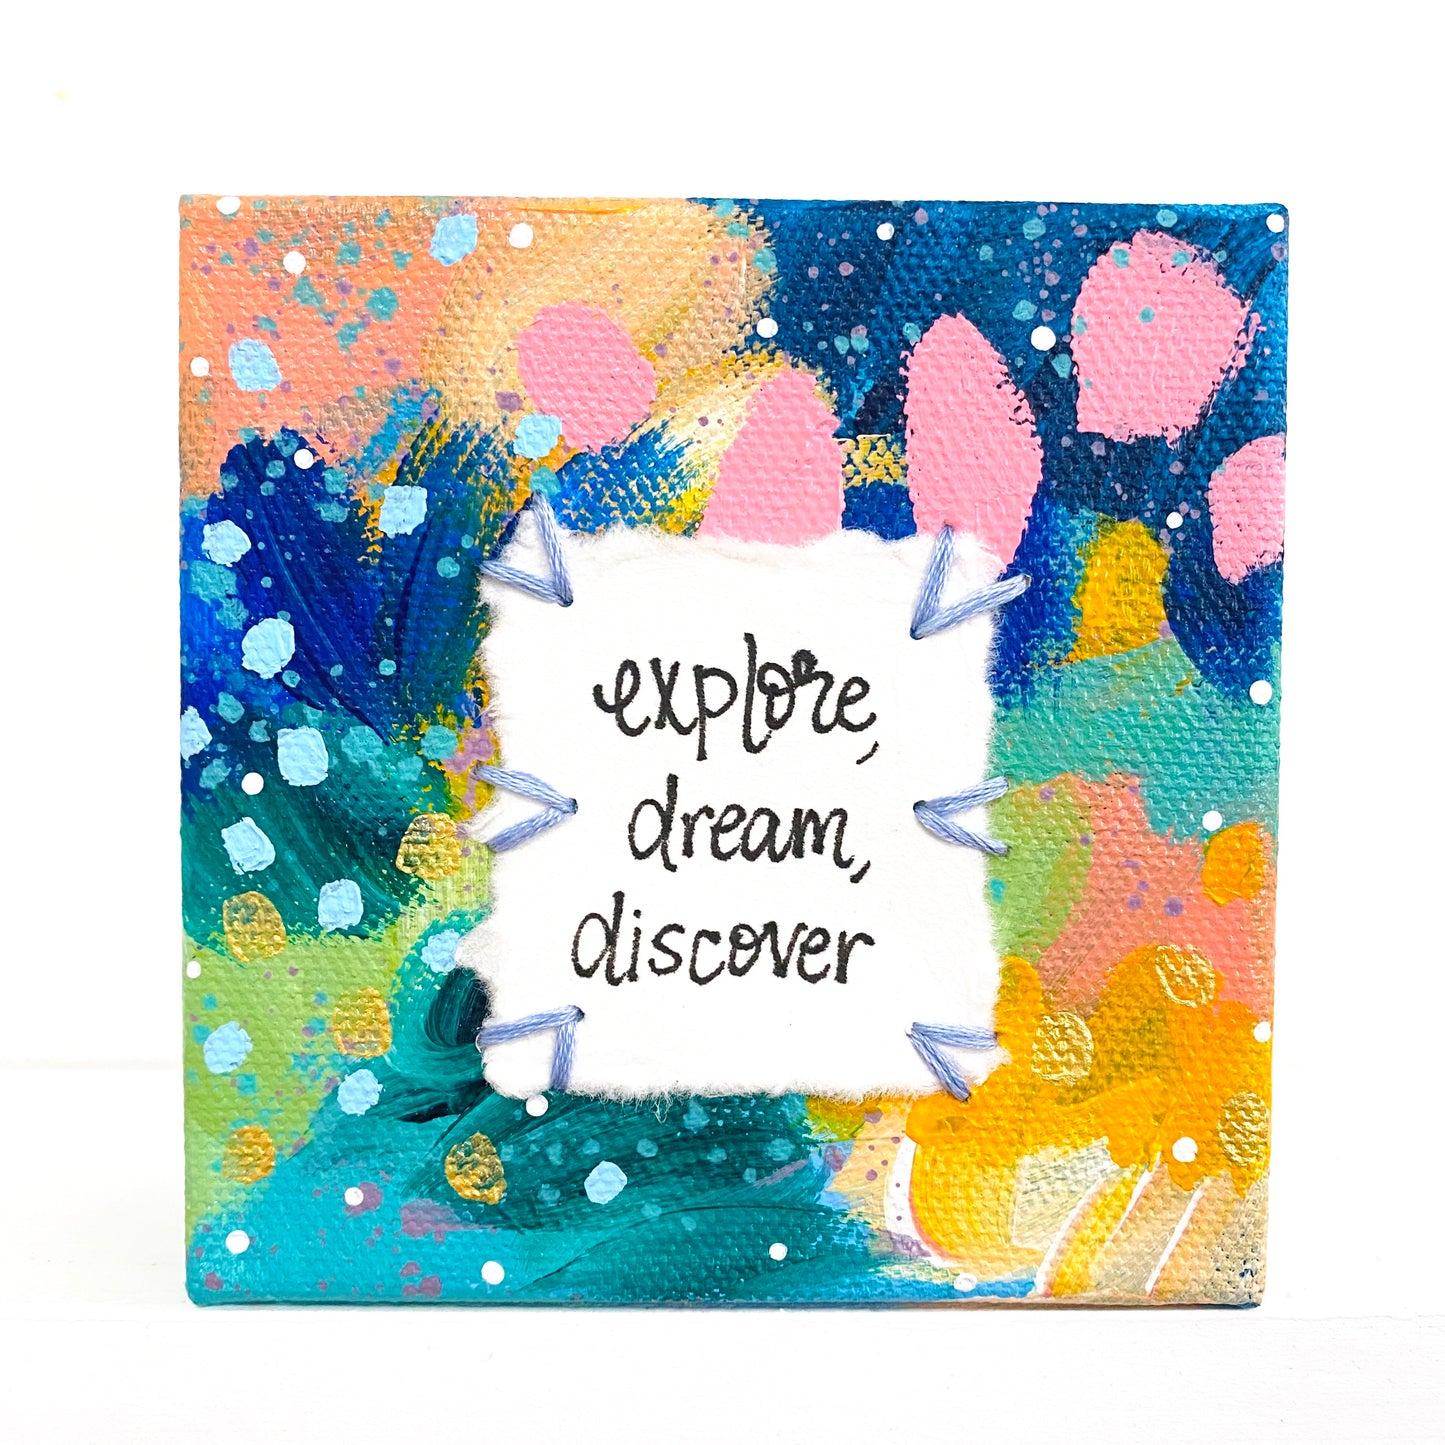 Explore, Dream, Discover 4x4 inch original abstract canvas with embroidery thread accents